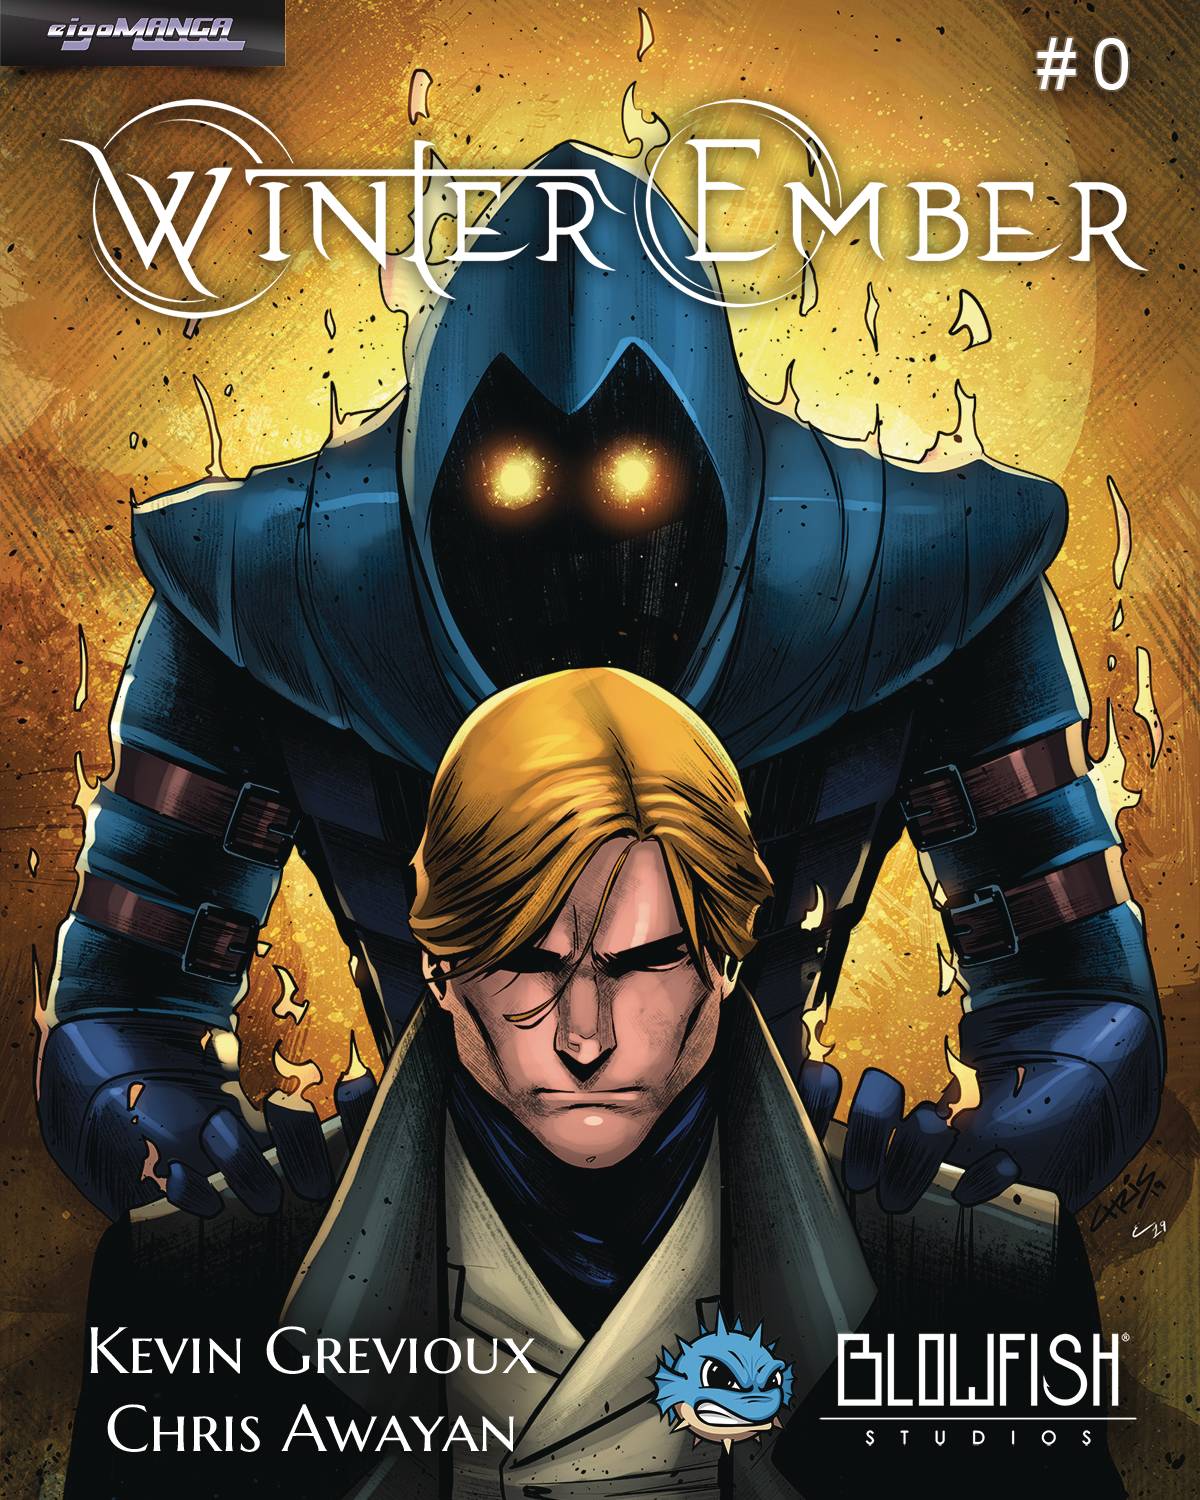 WINTER EMBER #0 , IN STORES: 02/15/2023 - The Comic Construct